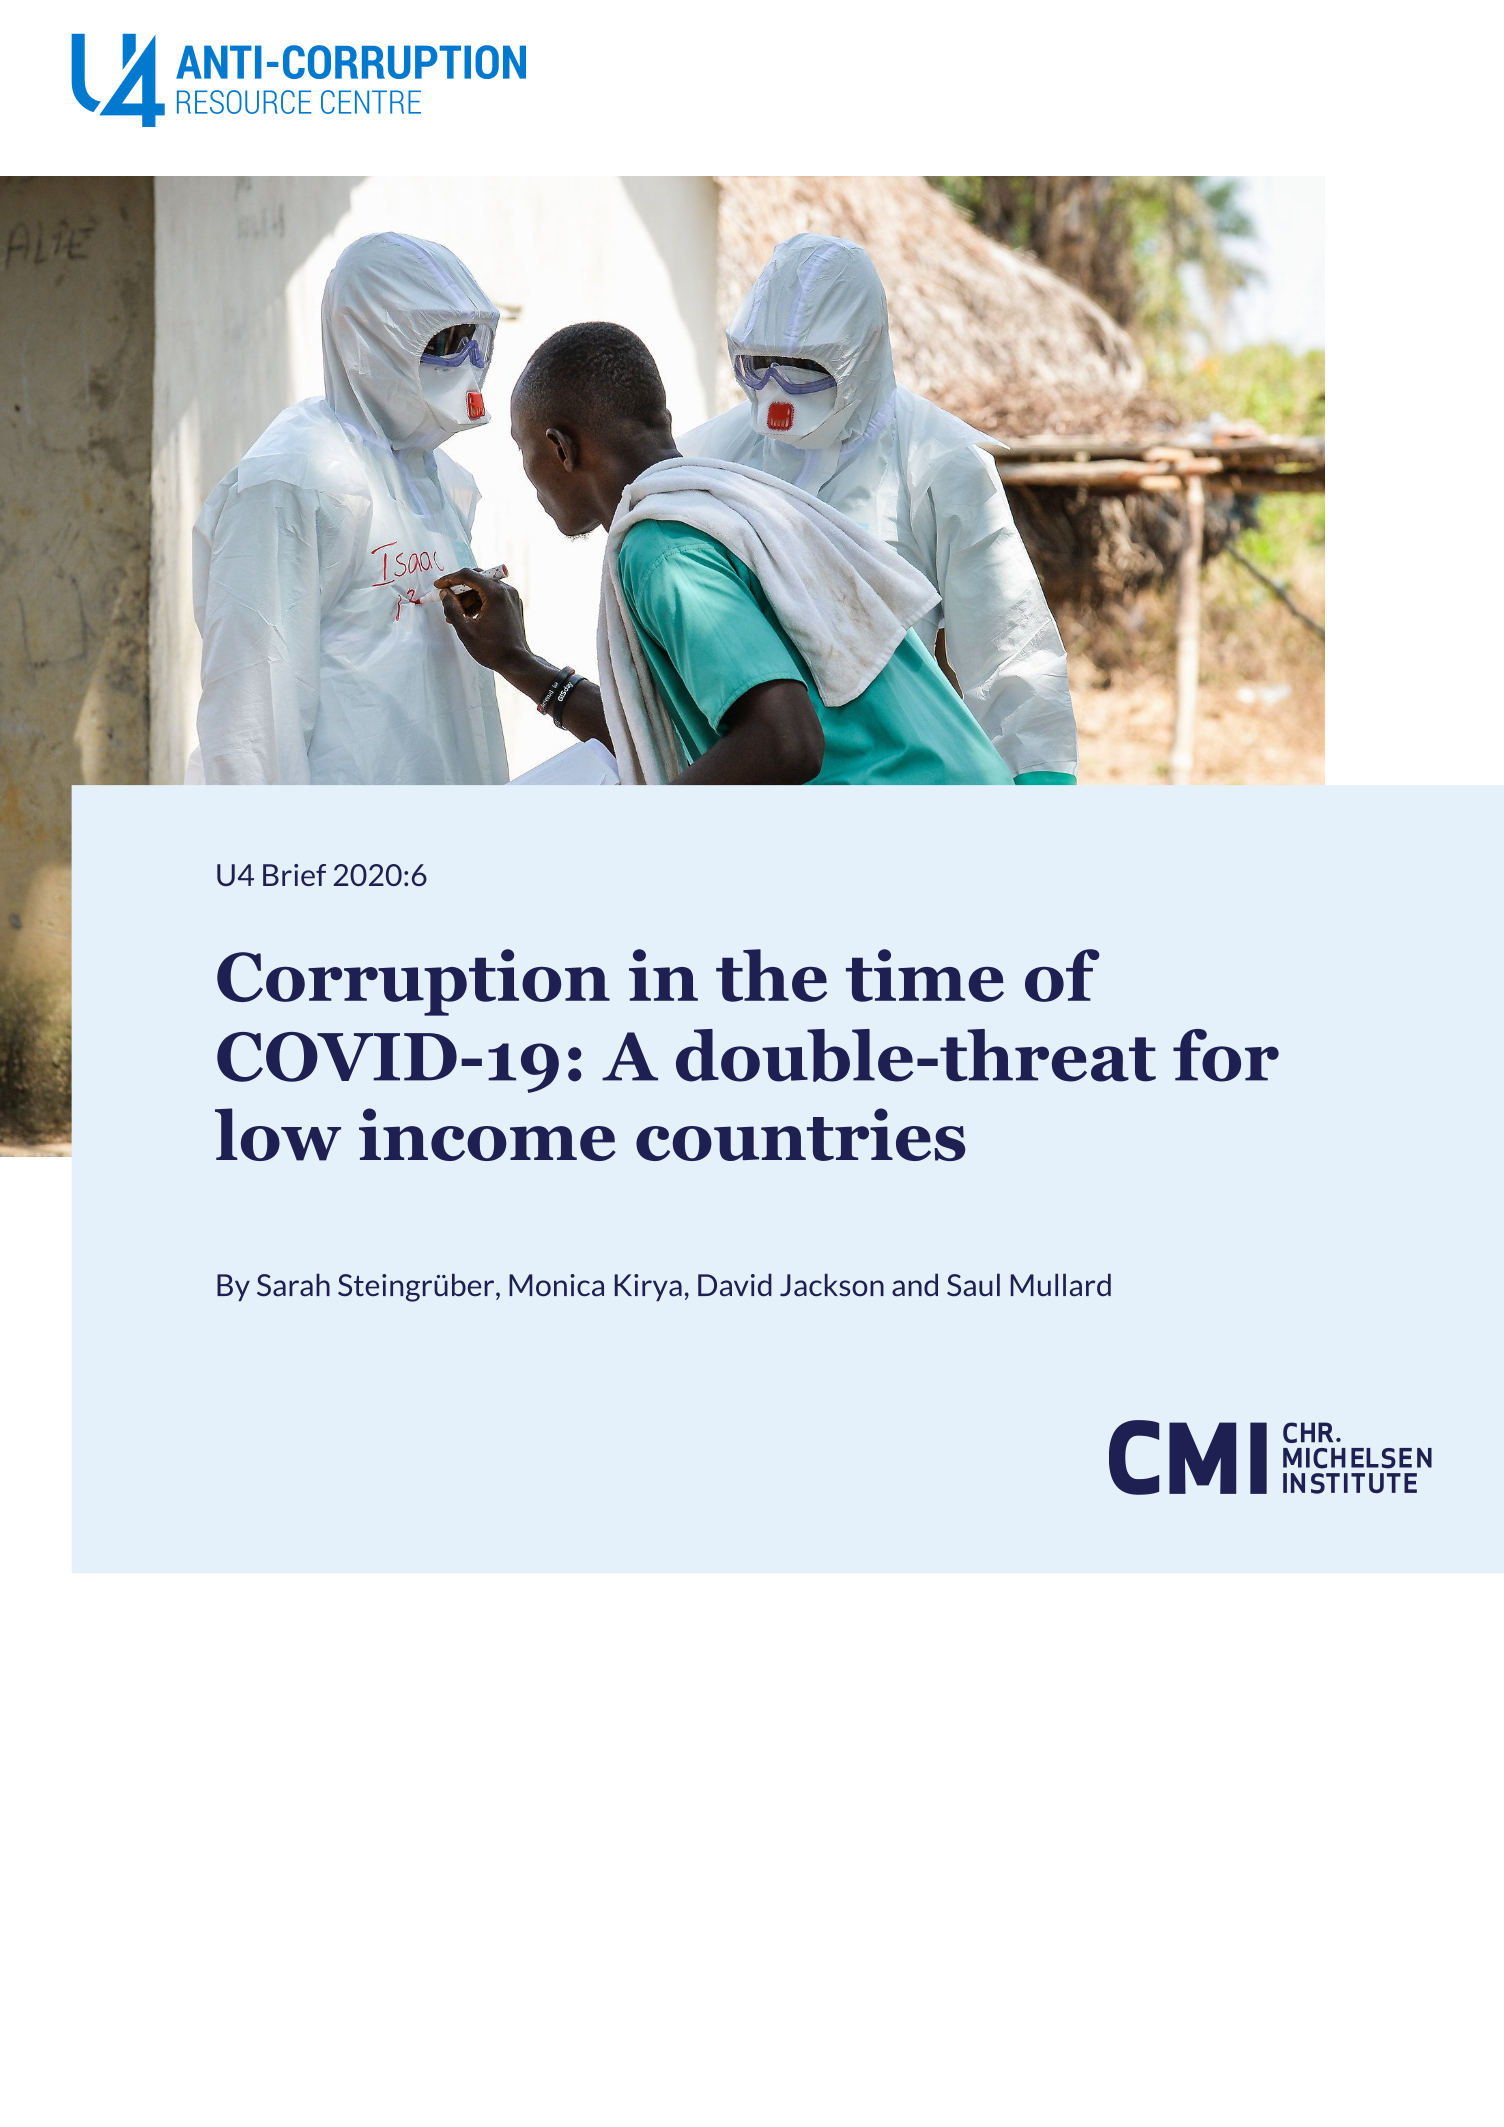 Corruption in the time of COVID-19: A double-threat for low income countries